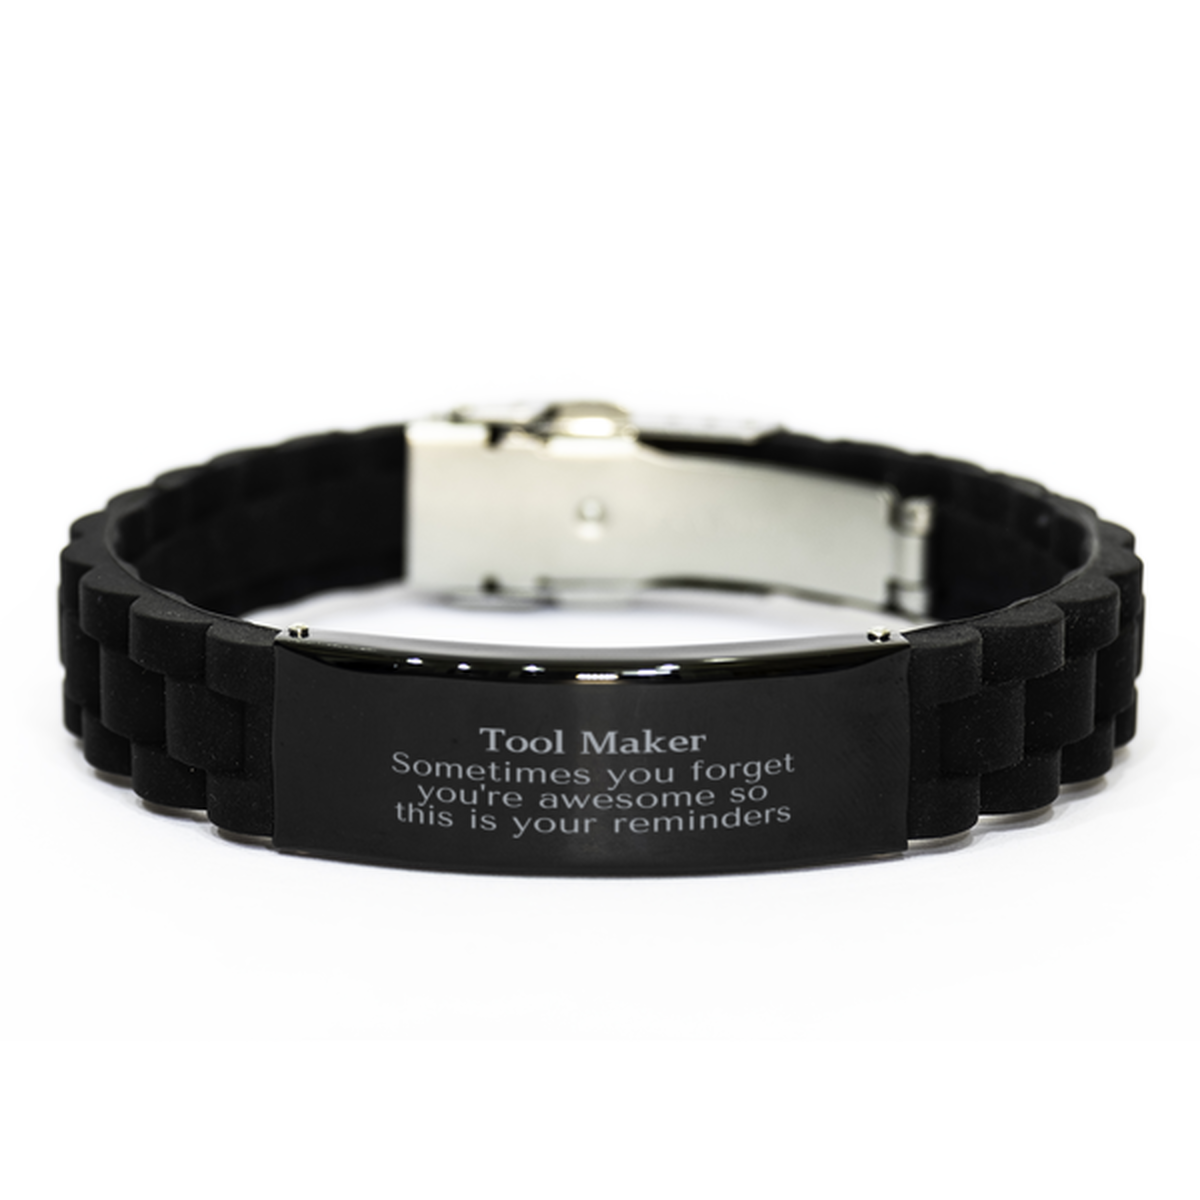 Sentimental Tool Maker Black Glidelock Clasp Bracelet, Tool Maker Sometimes you forget you're awesome so this is your reminders, Graduation Christmas Birthday Gifts for Tool Maker, Men, Women, Coworkers